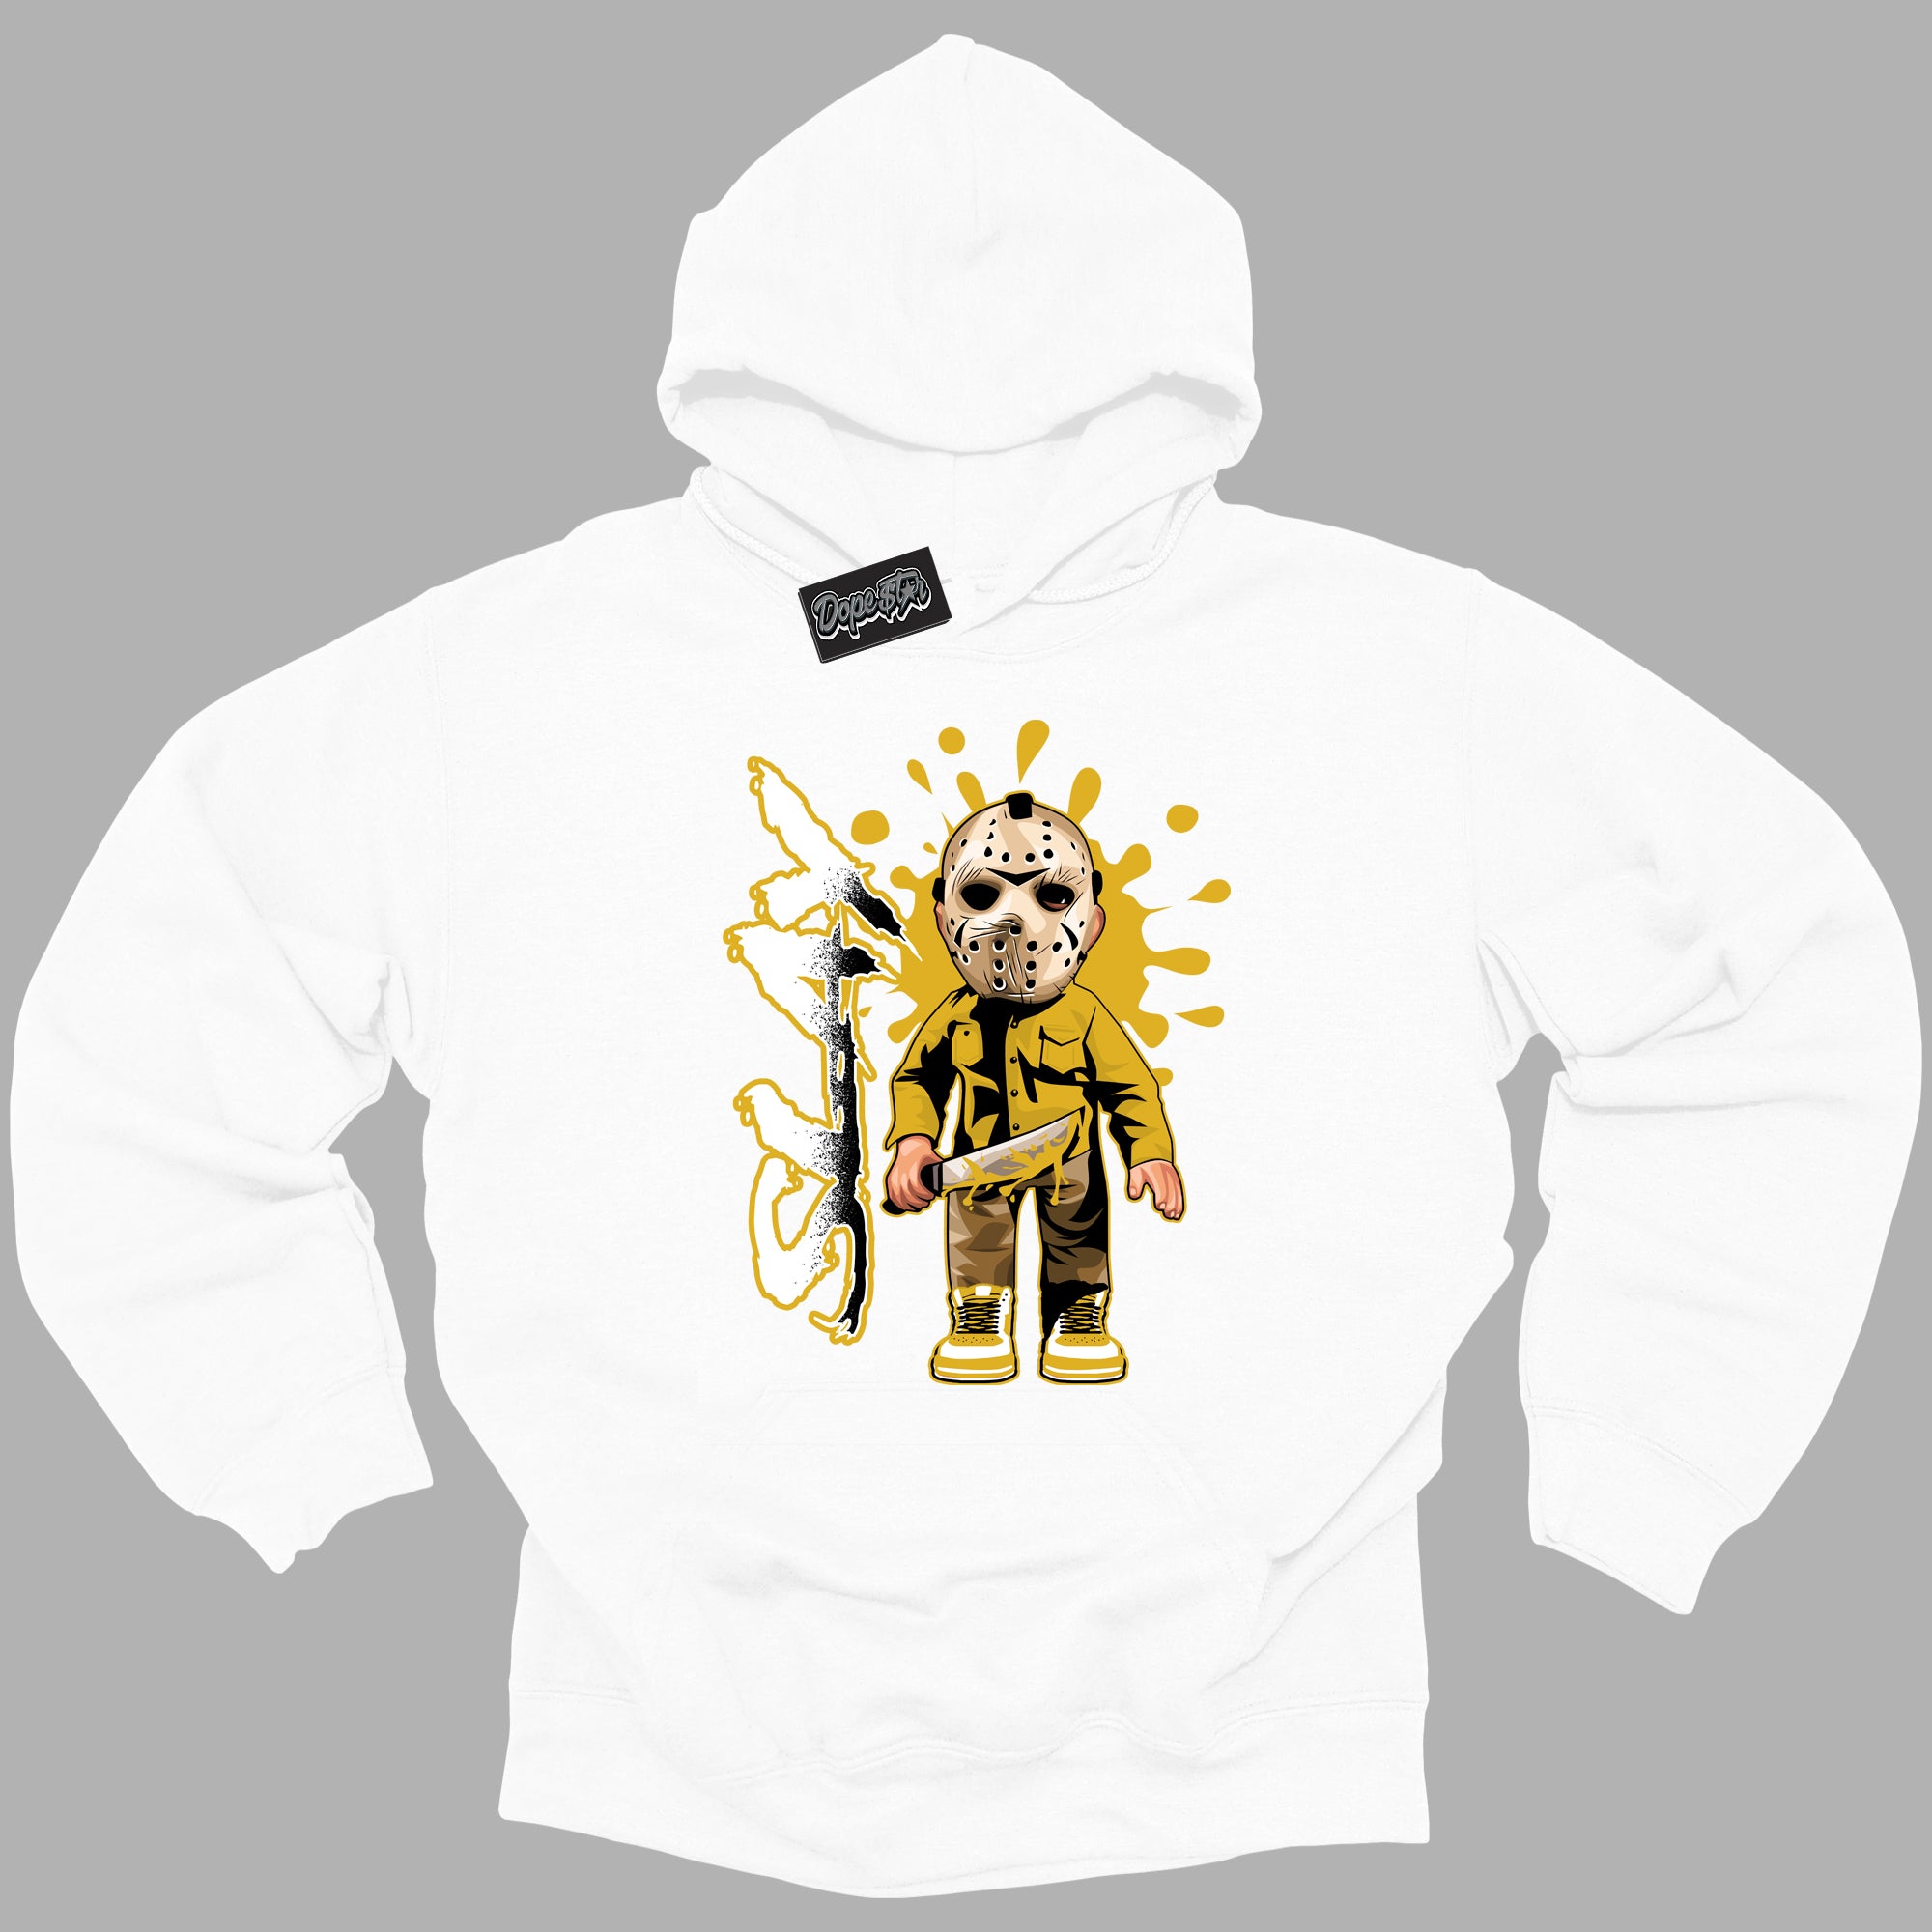 Cool White Hoodie with “ Slay ”  design that Perfectly Matches Yellow Ochre 6s Sneakers.